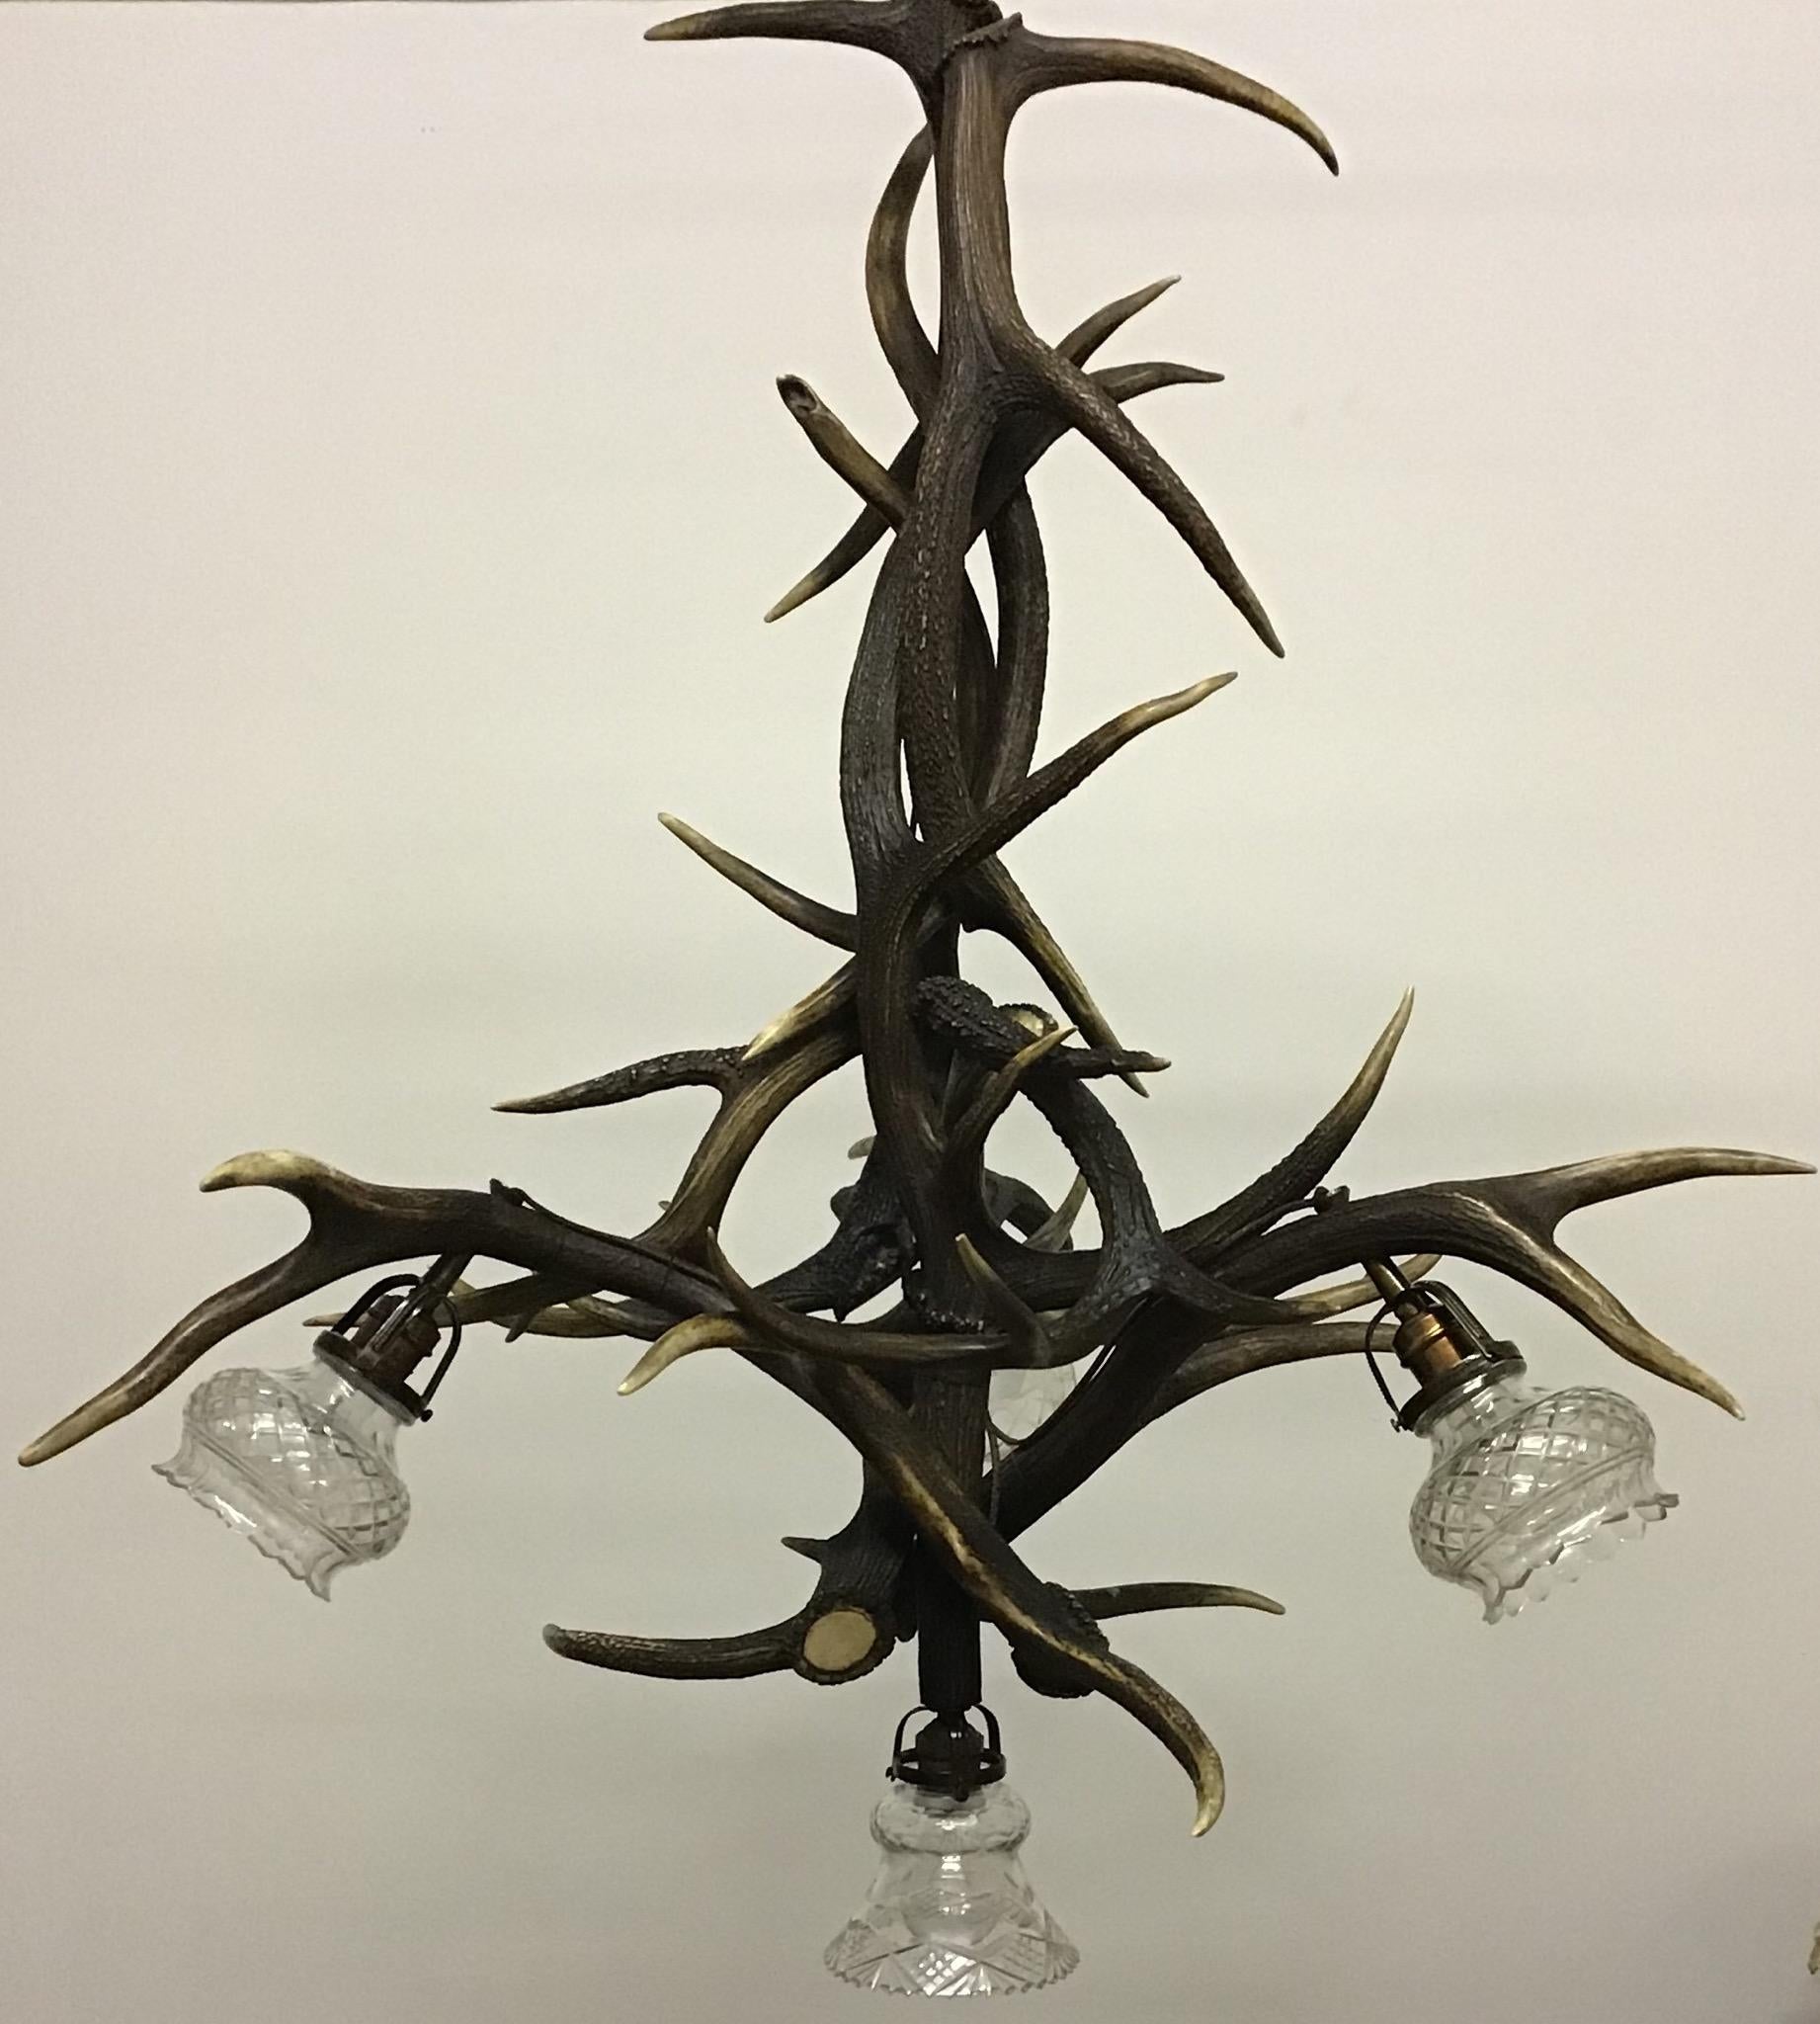 Large Antique Hunting Antlers Chandelier, Germany, circa 1900s (Art nouveau)